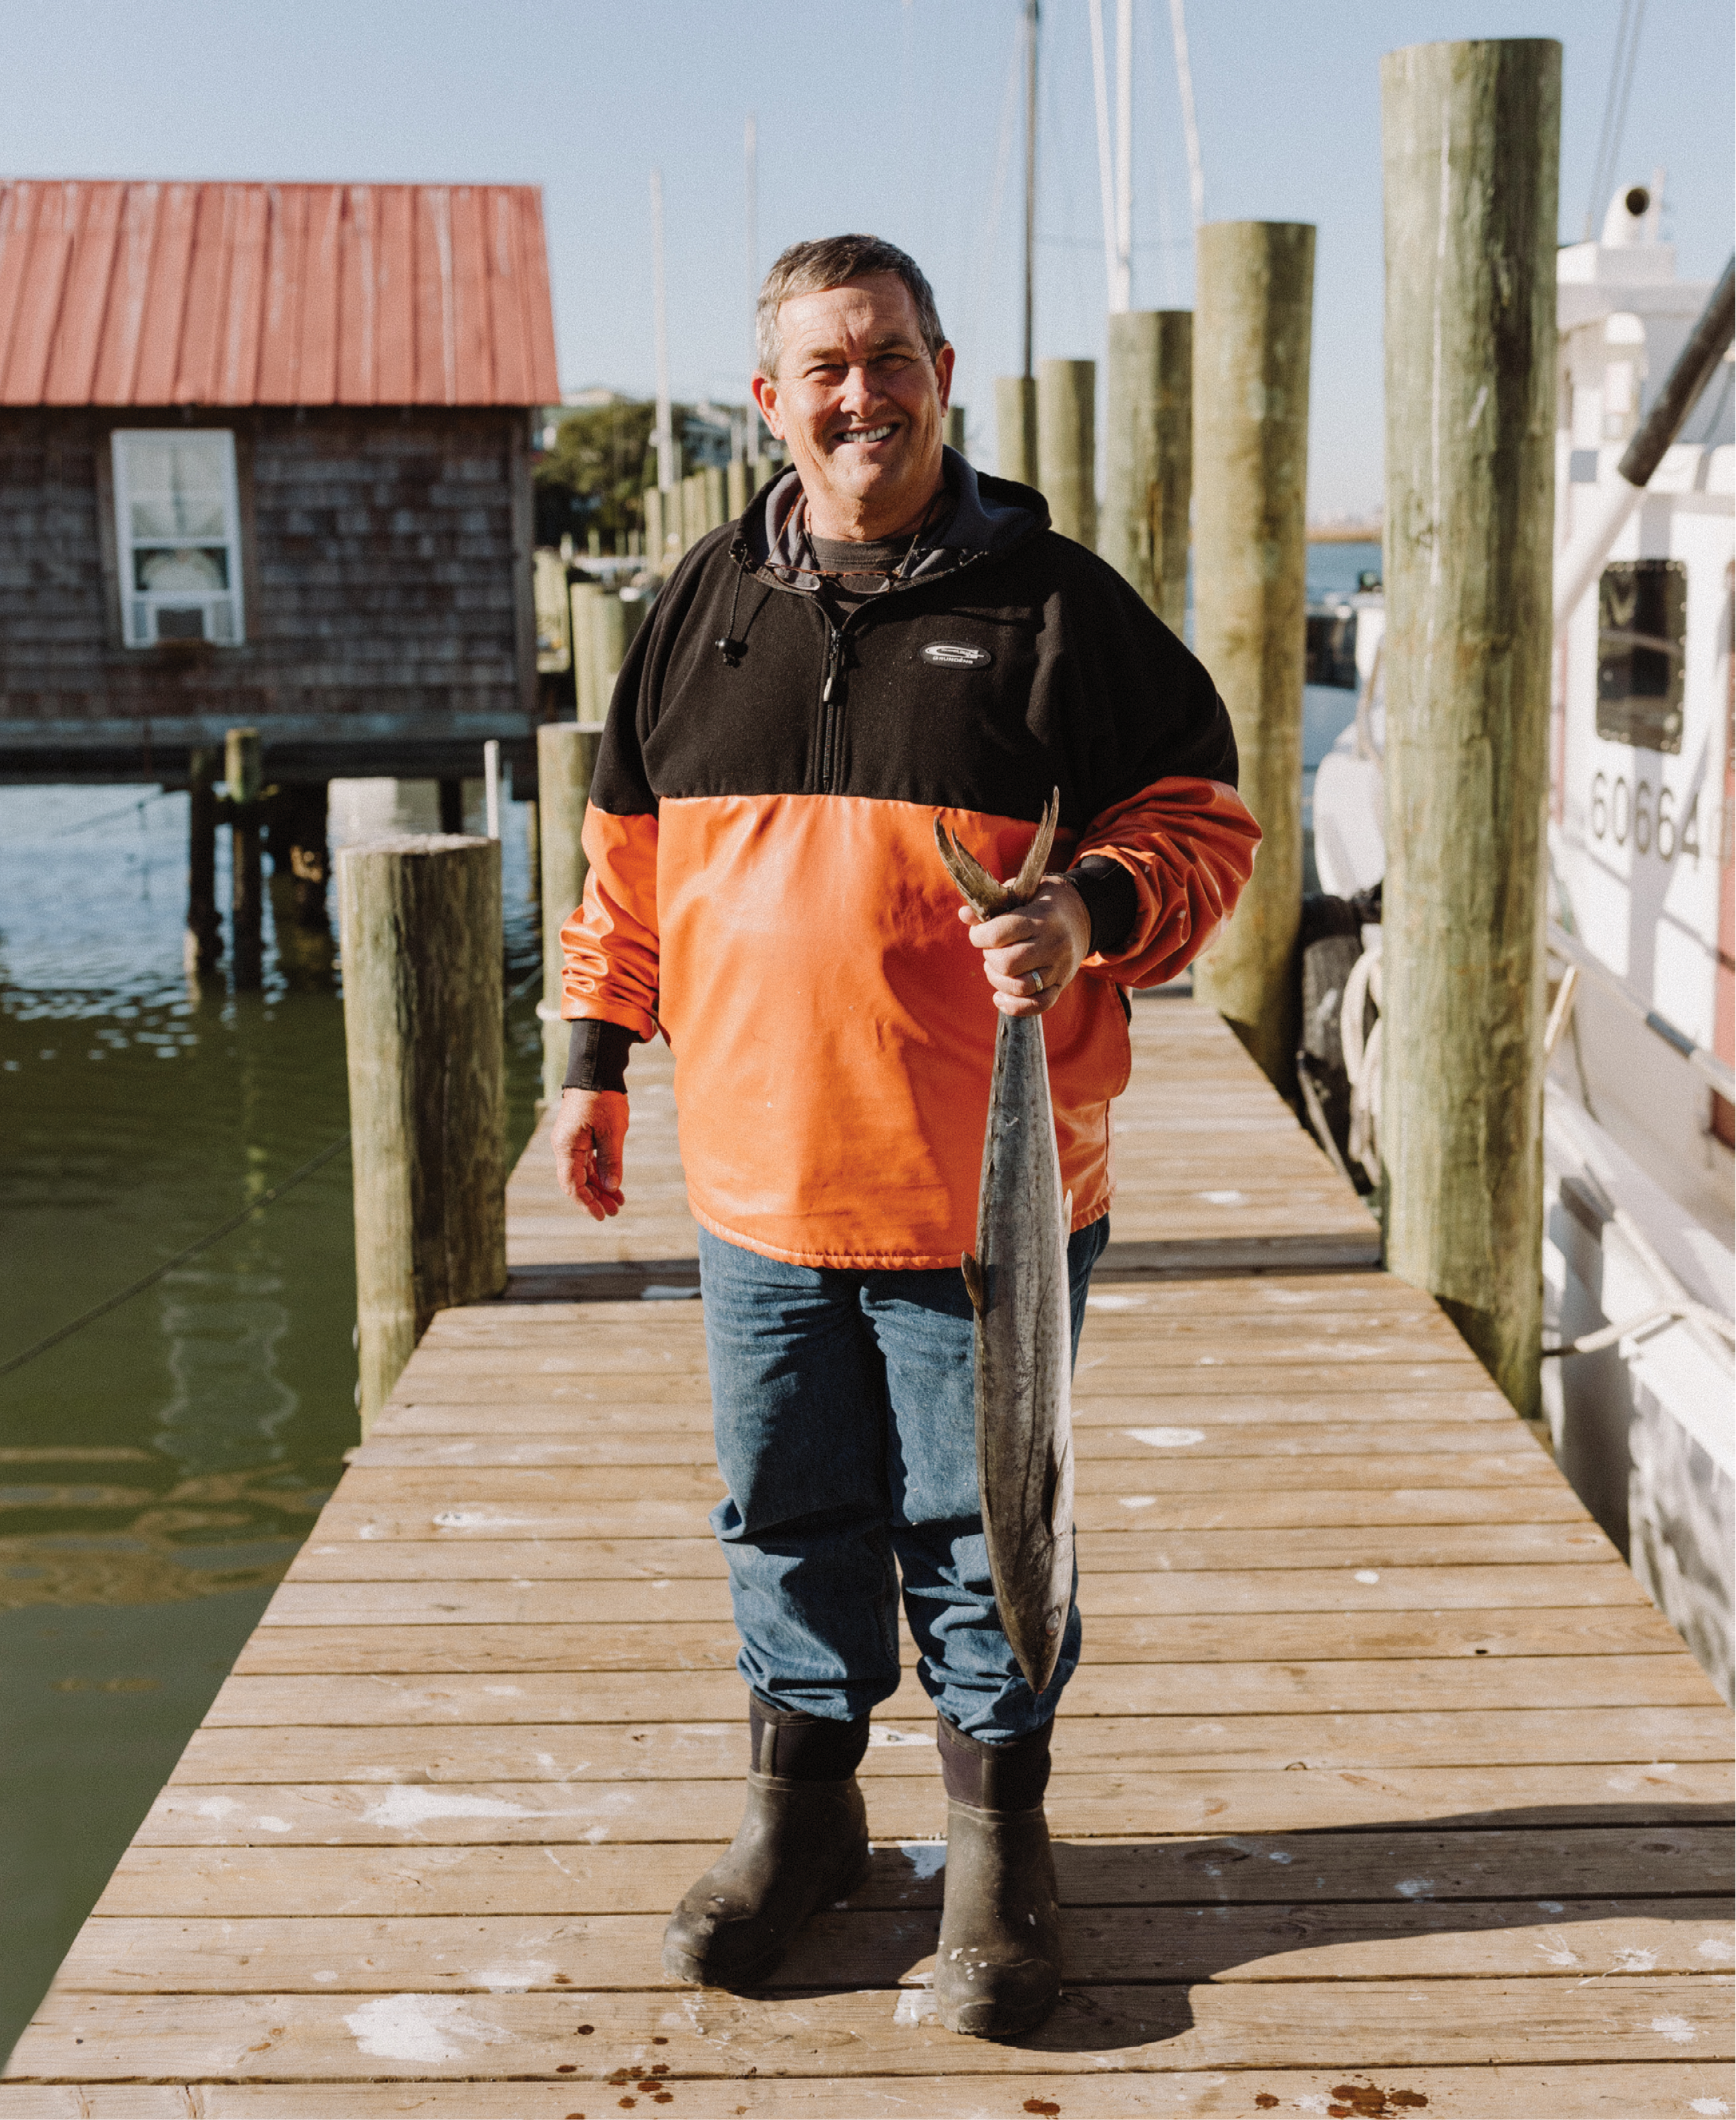 Local fisherman and Abundant Seafood owner Mark Marhefka with a king mackerel on Geechie Dock at Shem Creek